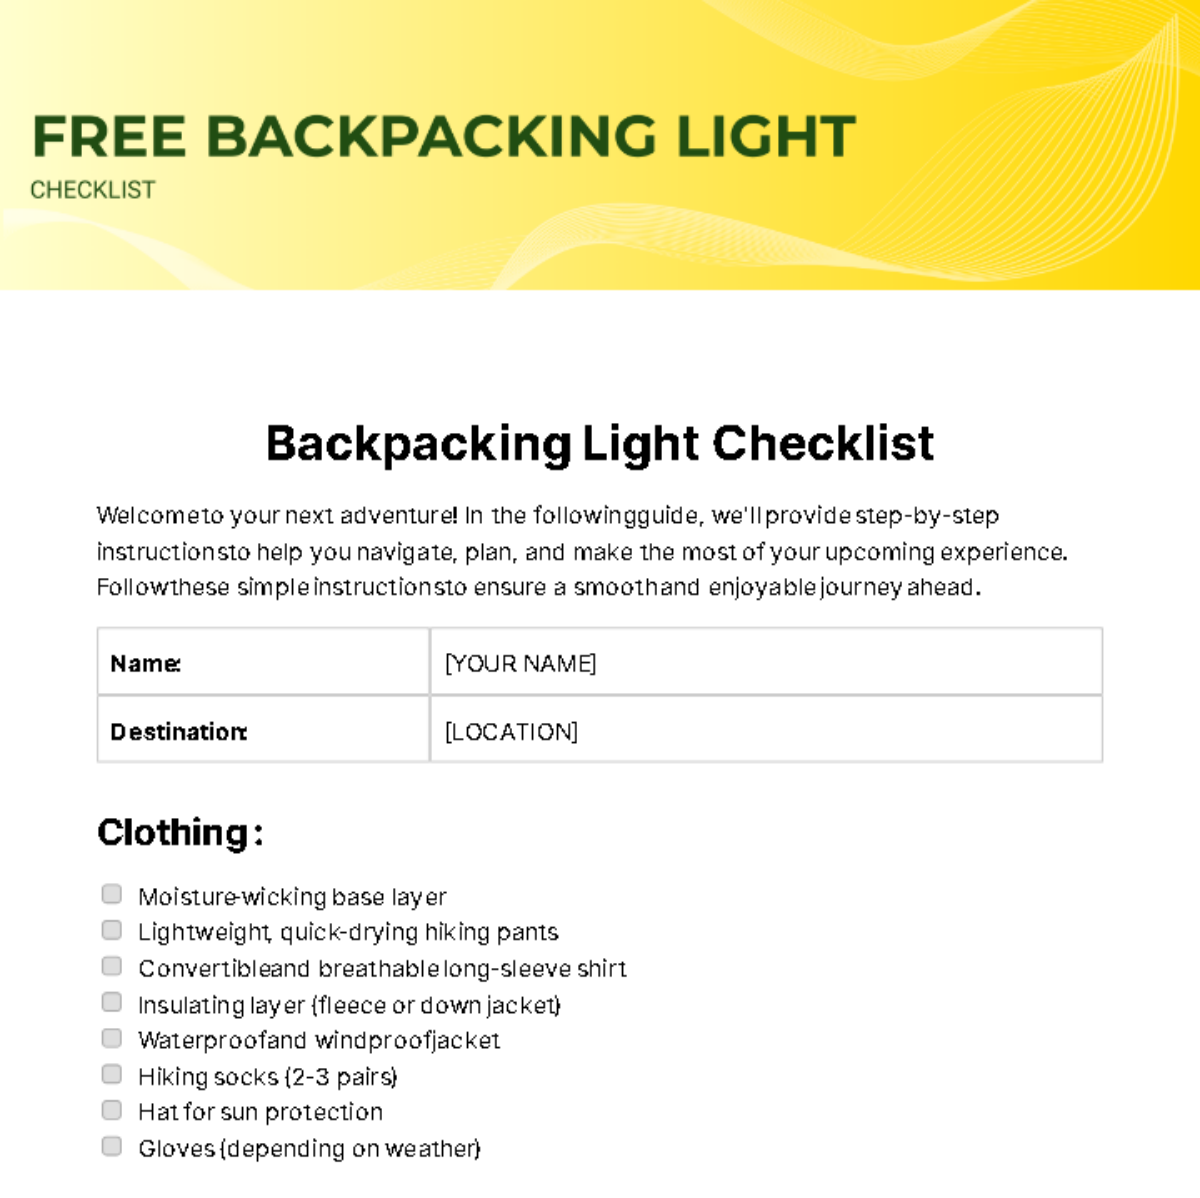 Backpacking Light Checklist Template